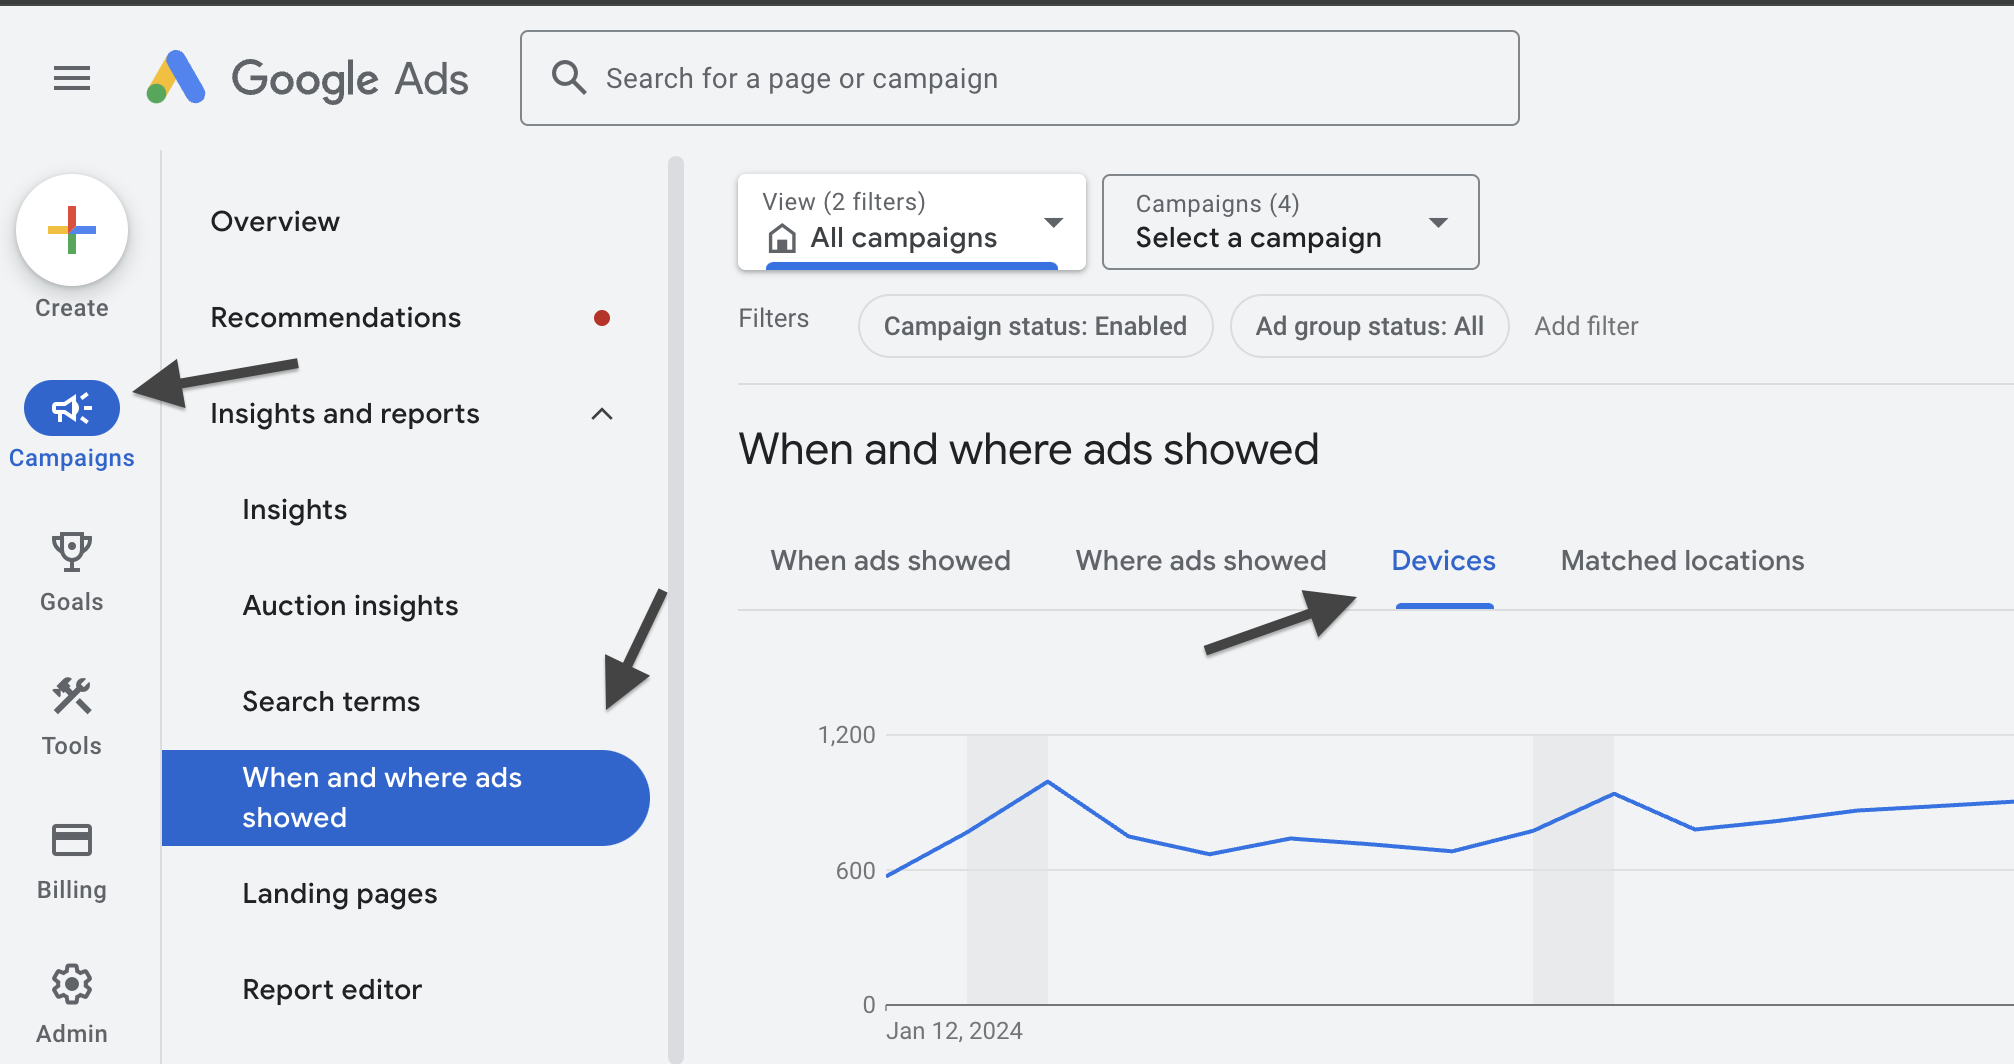 Setting Up Device Targeting in Google Ads